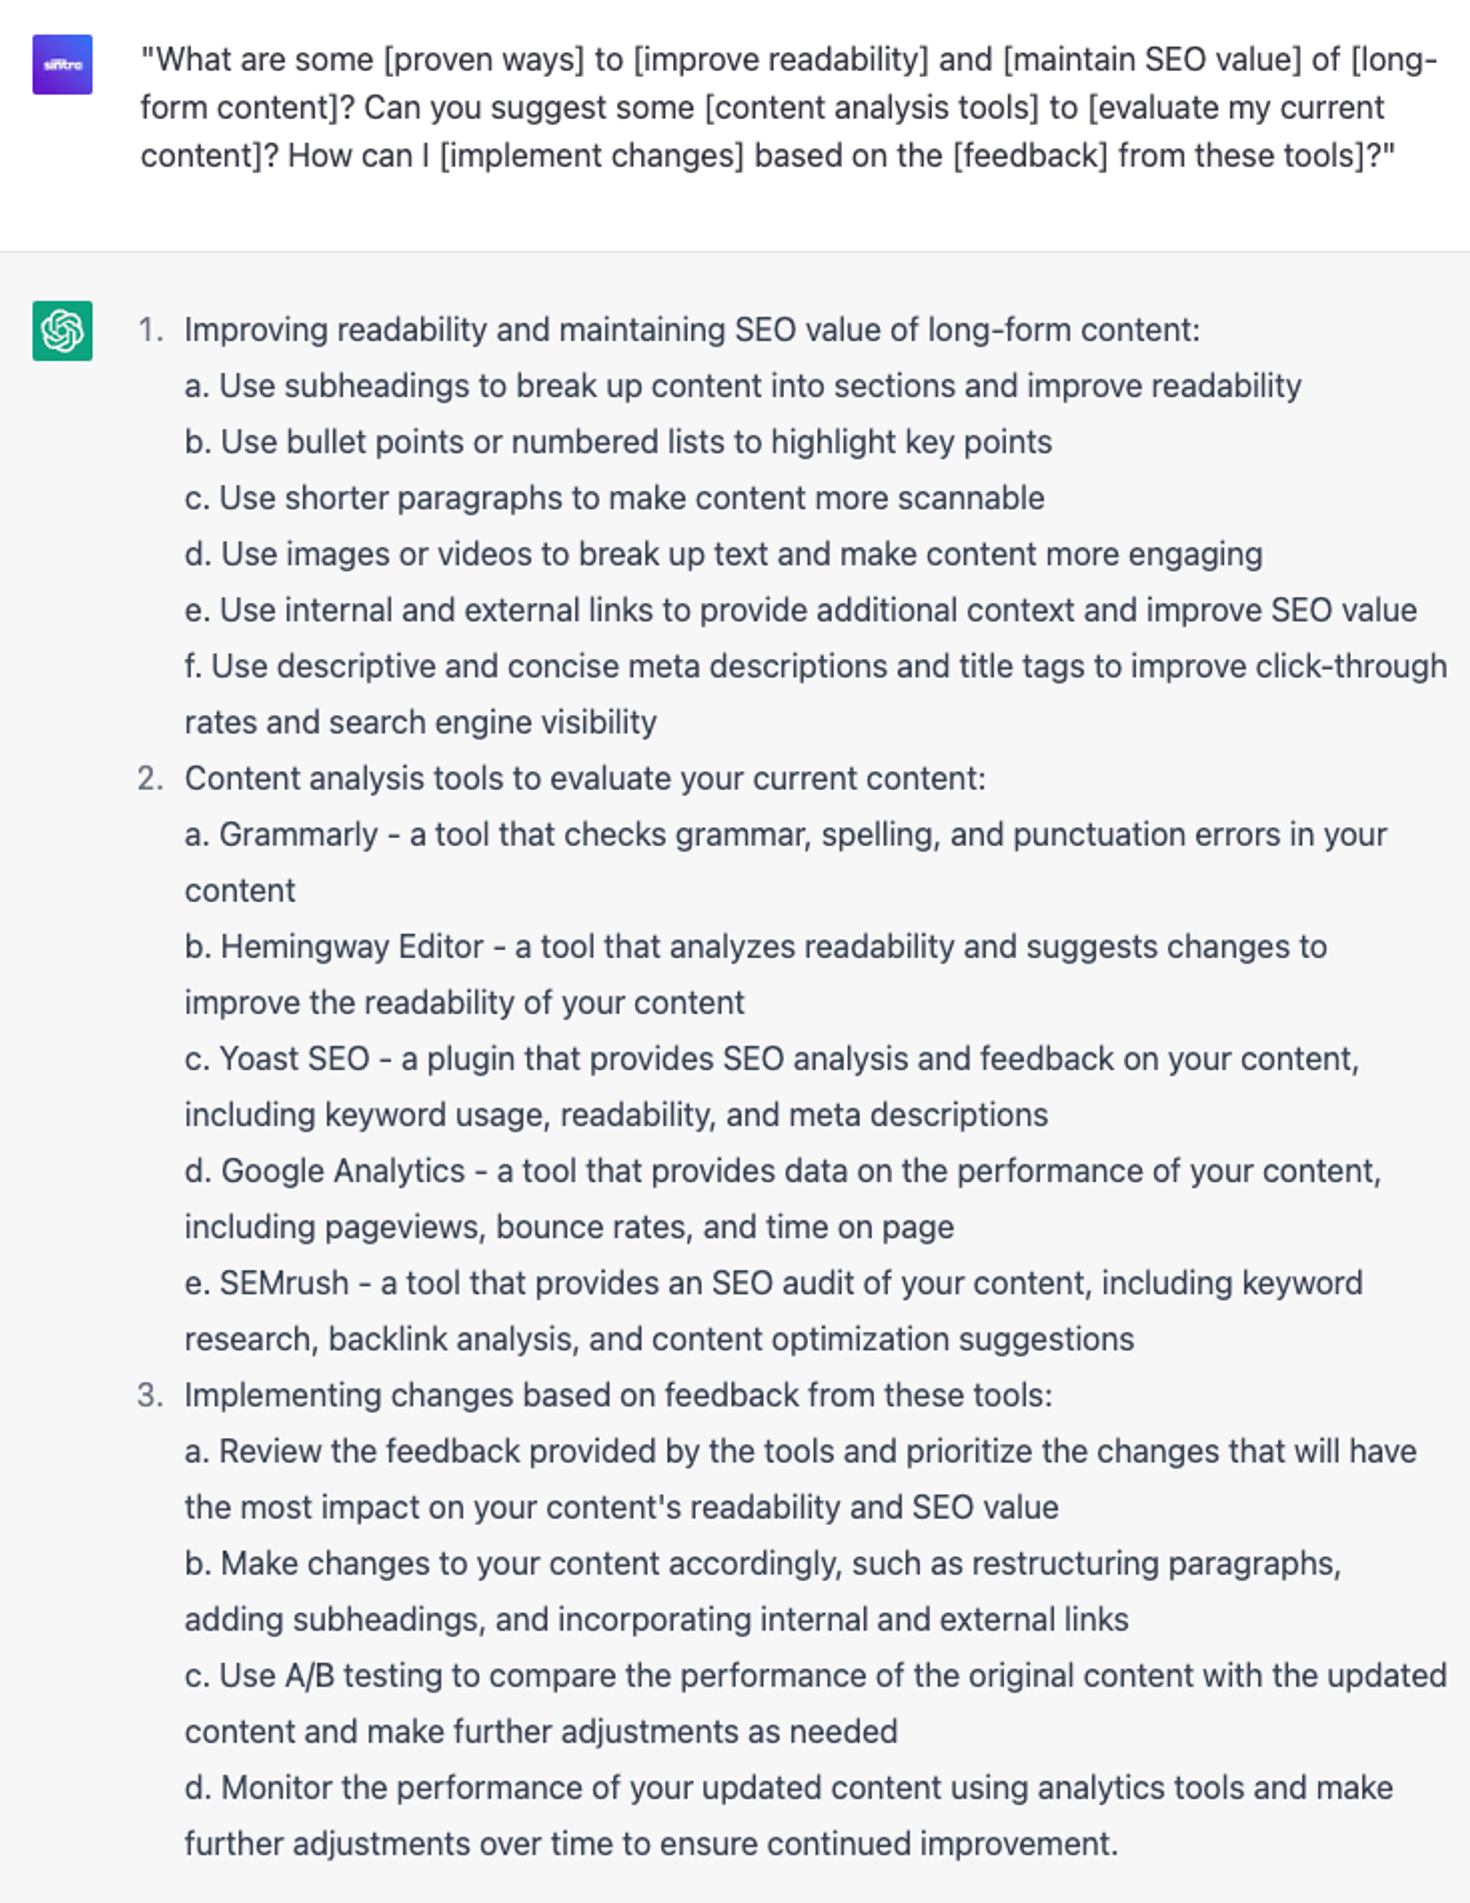  6 Expert ChatGPT Prompts: Developing SEO content